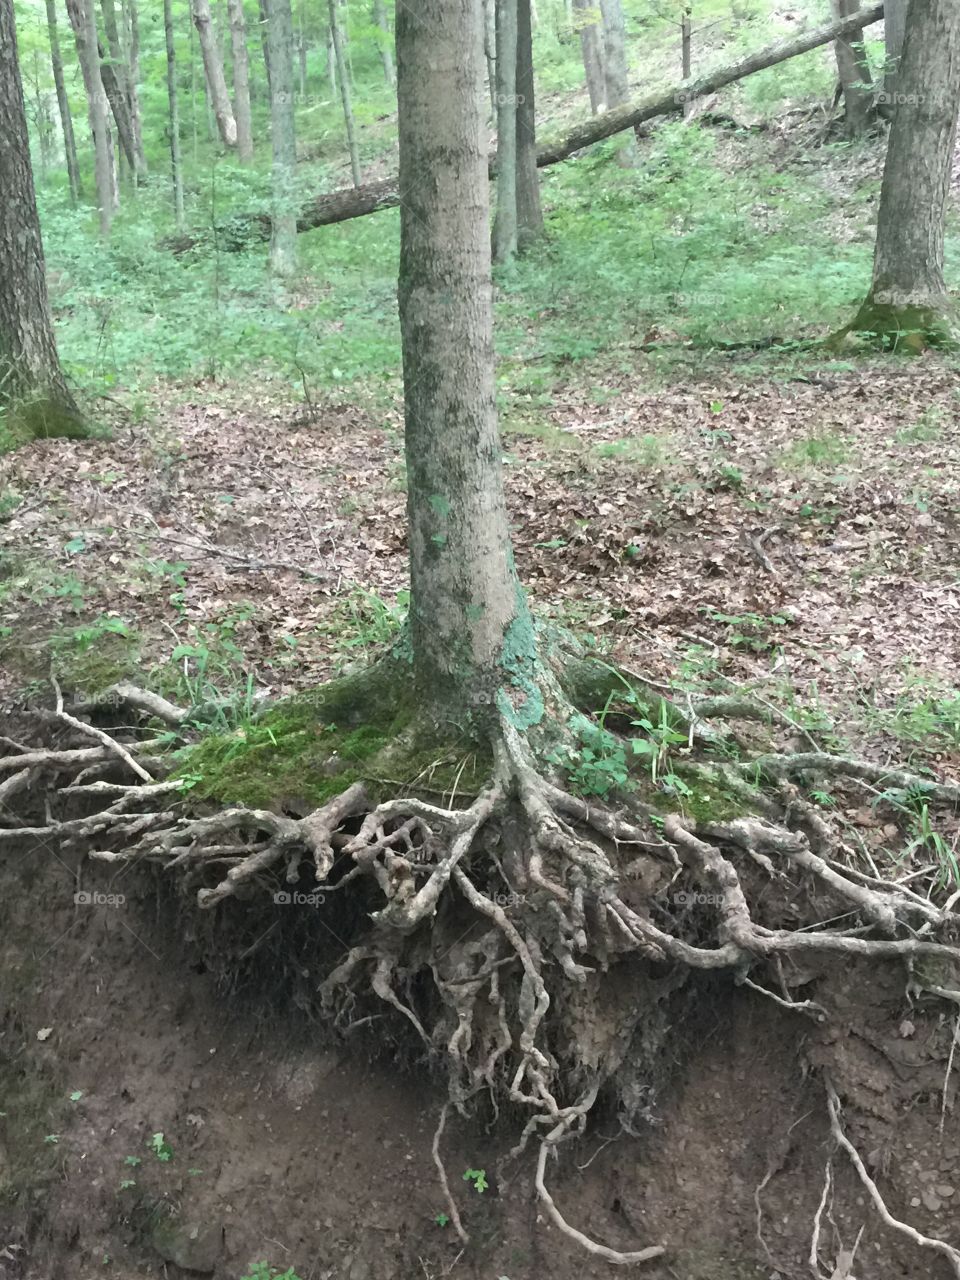 Cool tree roots exposed